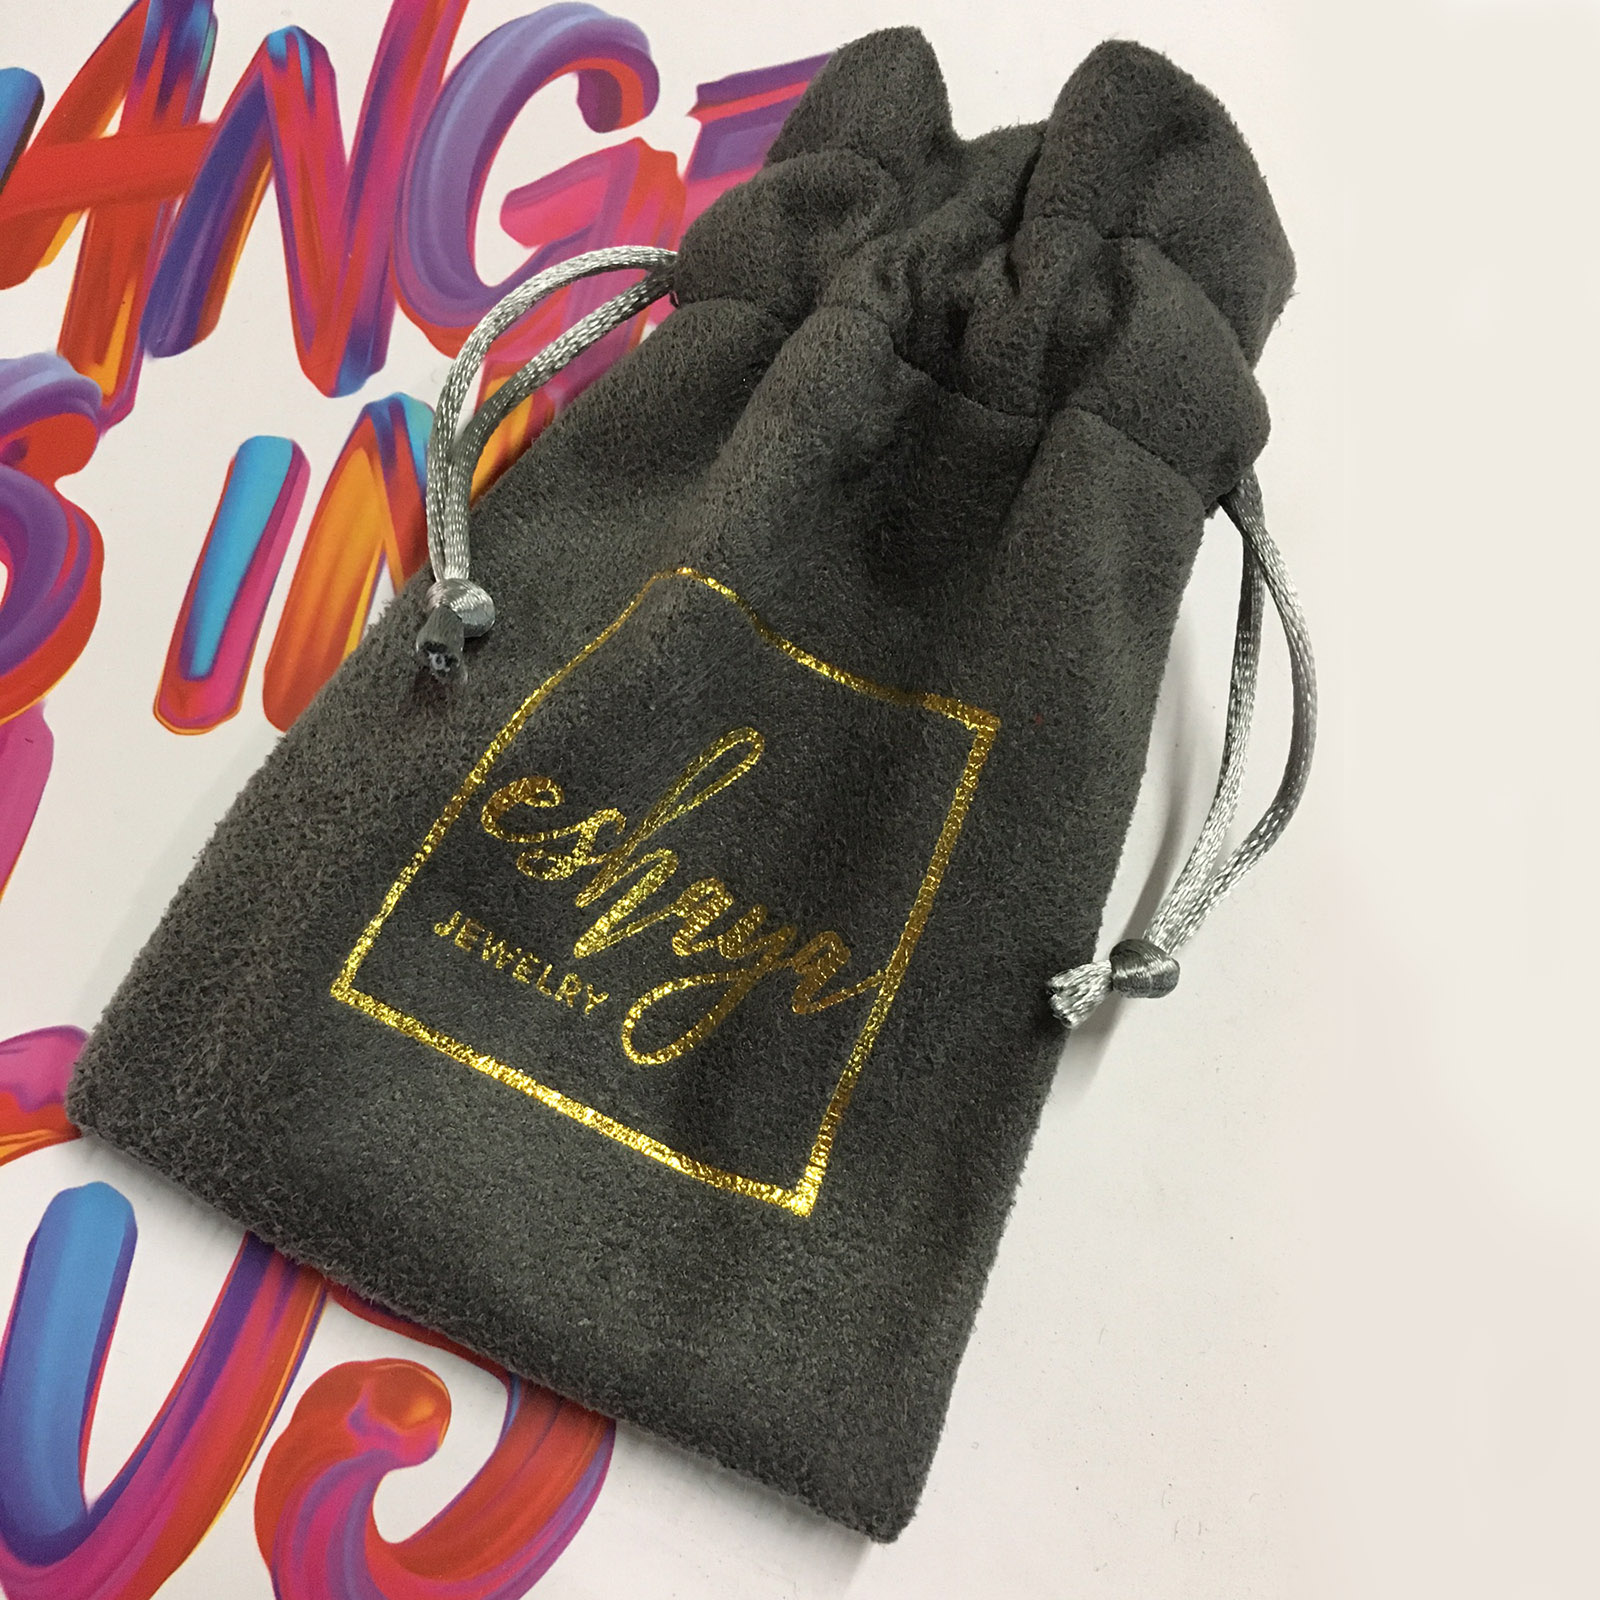 Gold Foil Stamped Suede Jewelry Drawstring Bag Design - Luxury